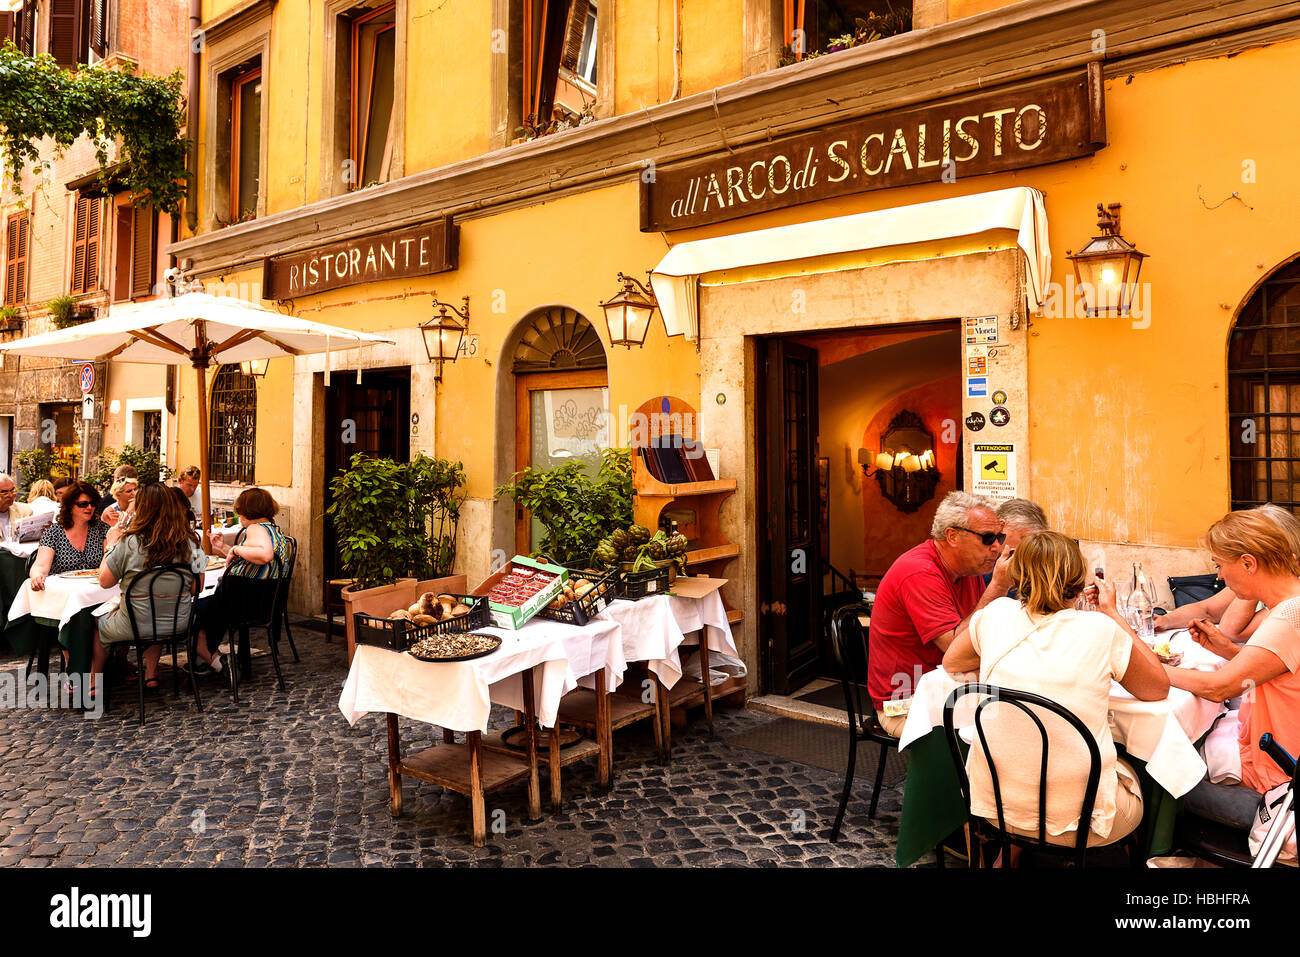 Rome, Italy - May 27, 2016: Unidentified people eating traditional italian food in outdoor restaurant in Trastevere district in Rome, Italy. Stock Photo